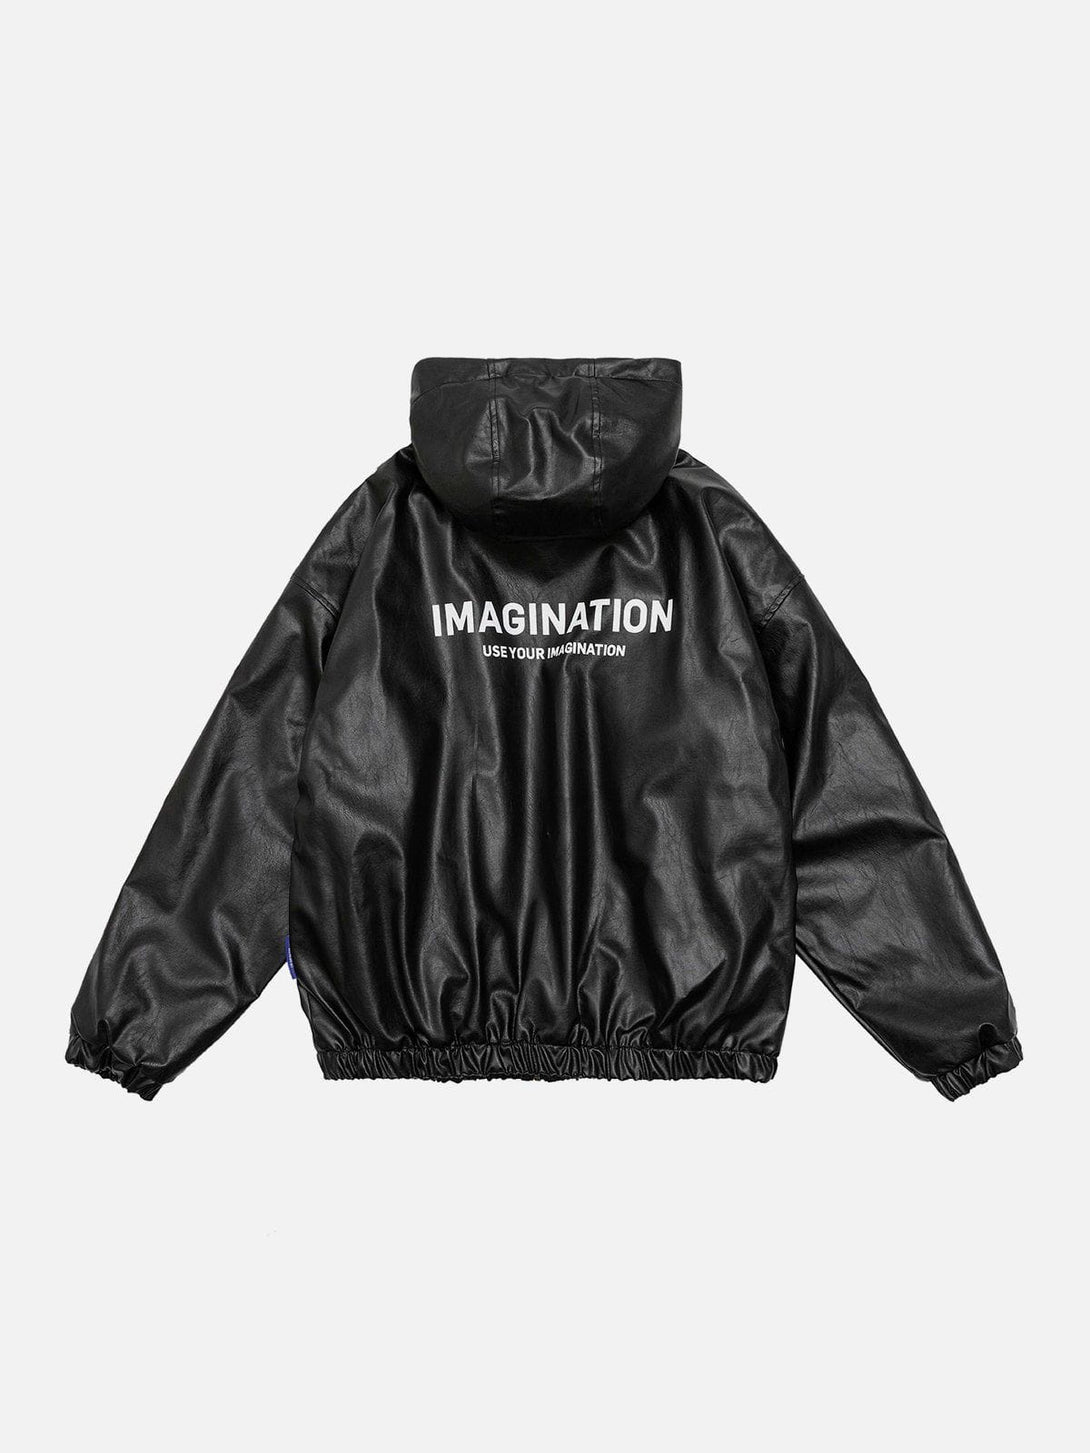 Majesda® - Letter Print Leather Jacket outfit ideas streetwear fashion